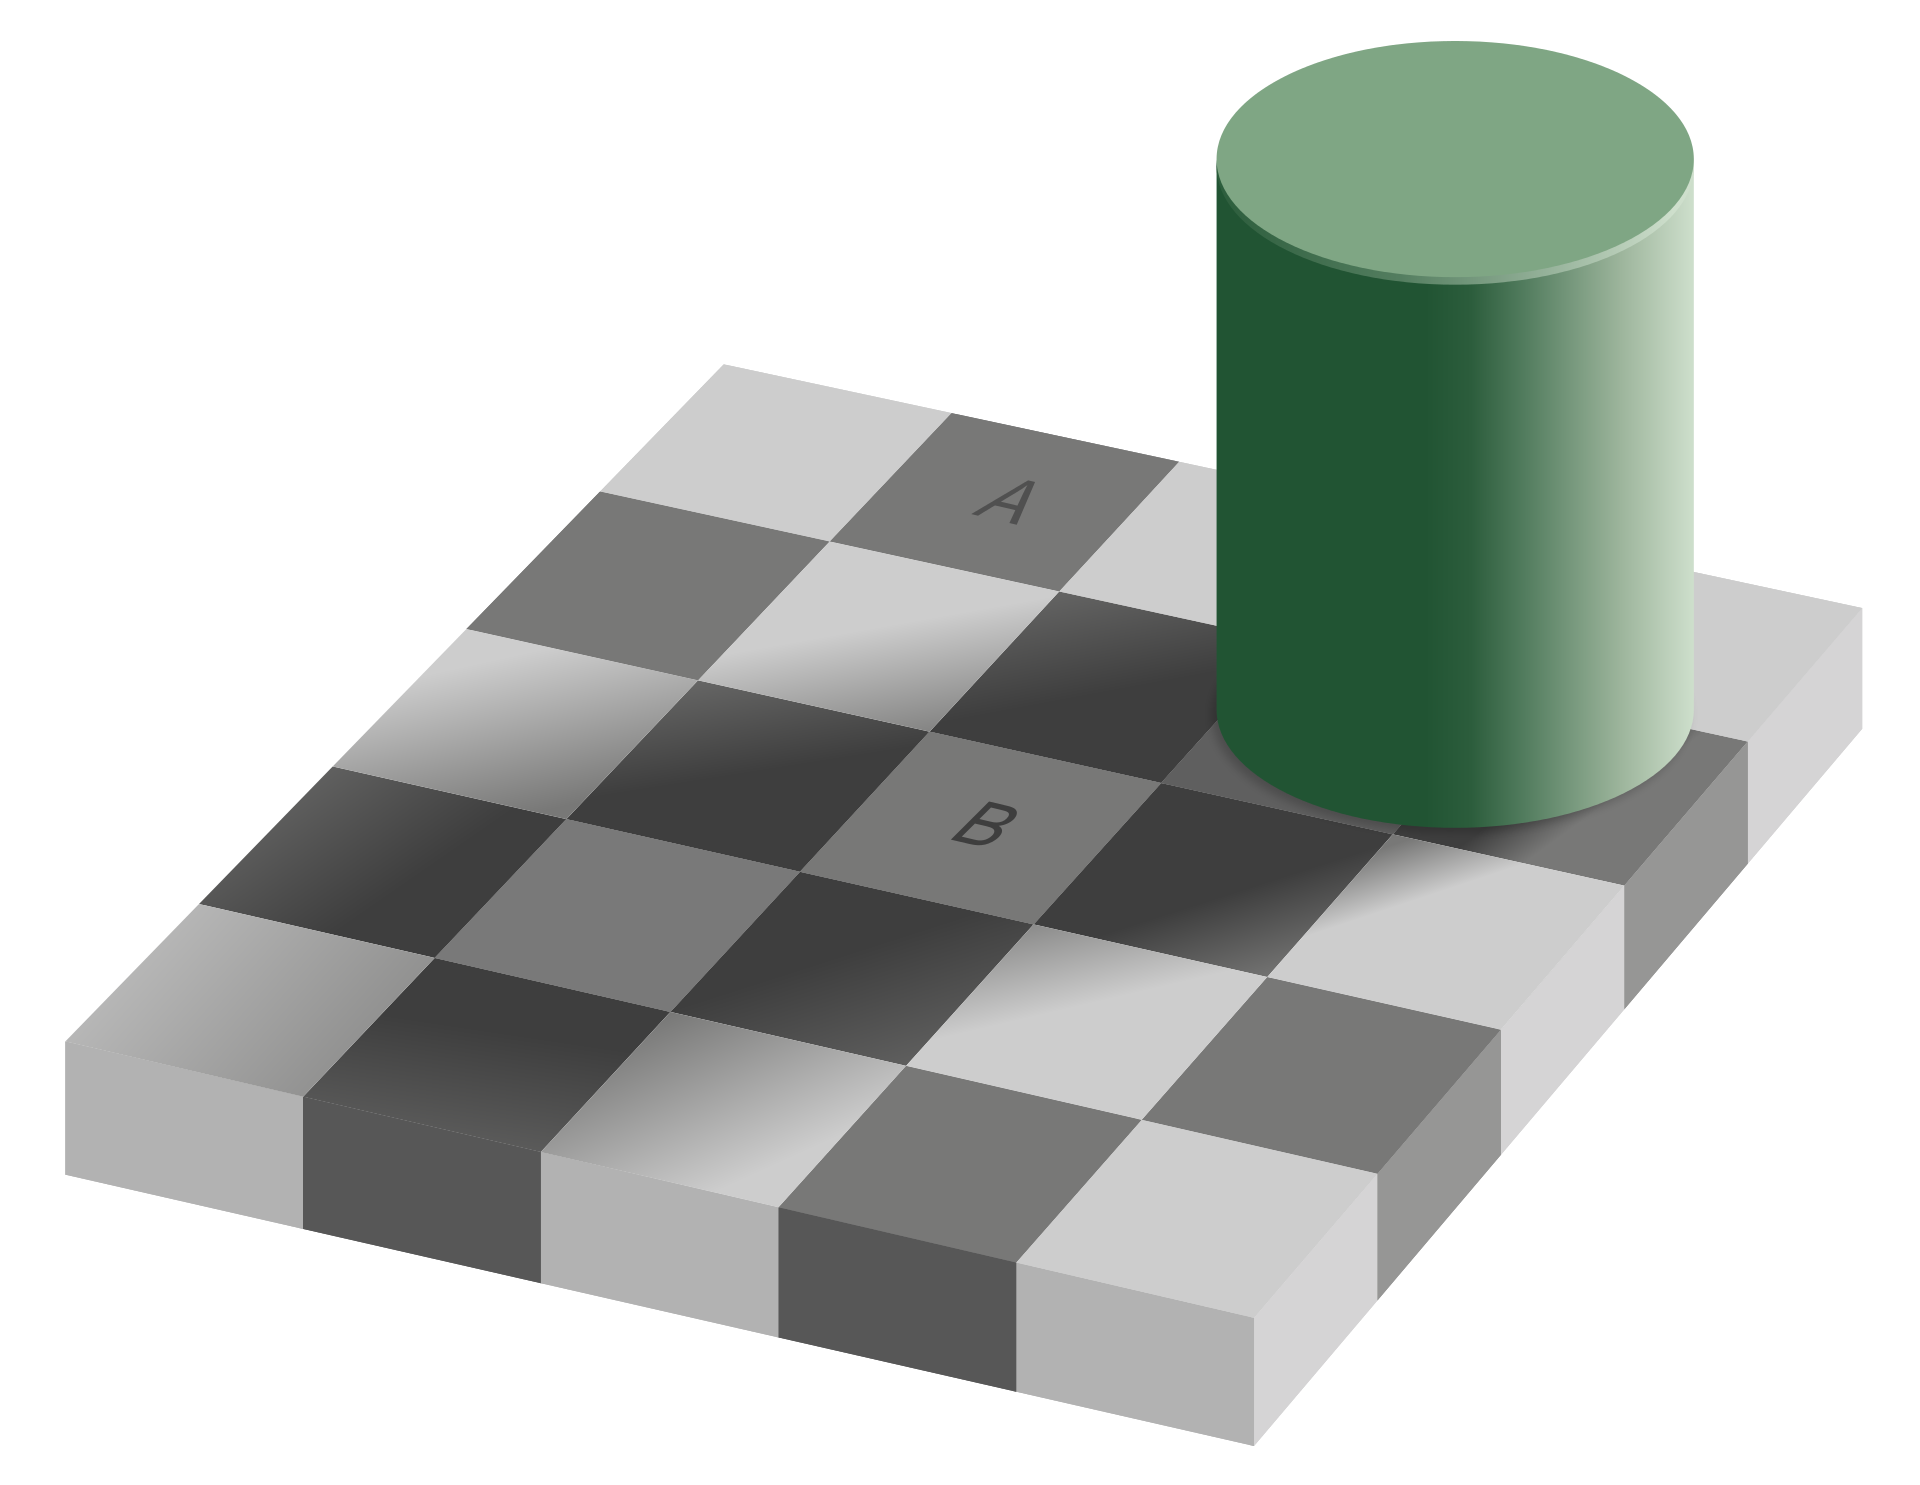 A chessboard in grey scale has a green cylinder on the top right corner. The cylinder casts a shadow from the top right corner to the bottom left corner. The letter A  is written in a square that isn't in shadow.  The letter B is written on an alternate g